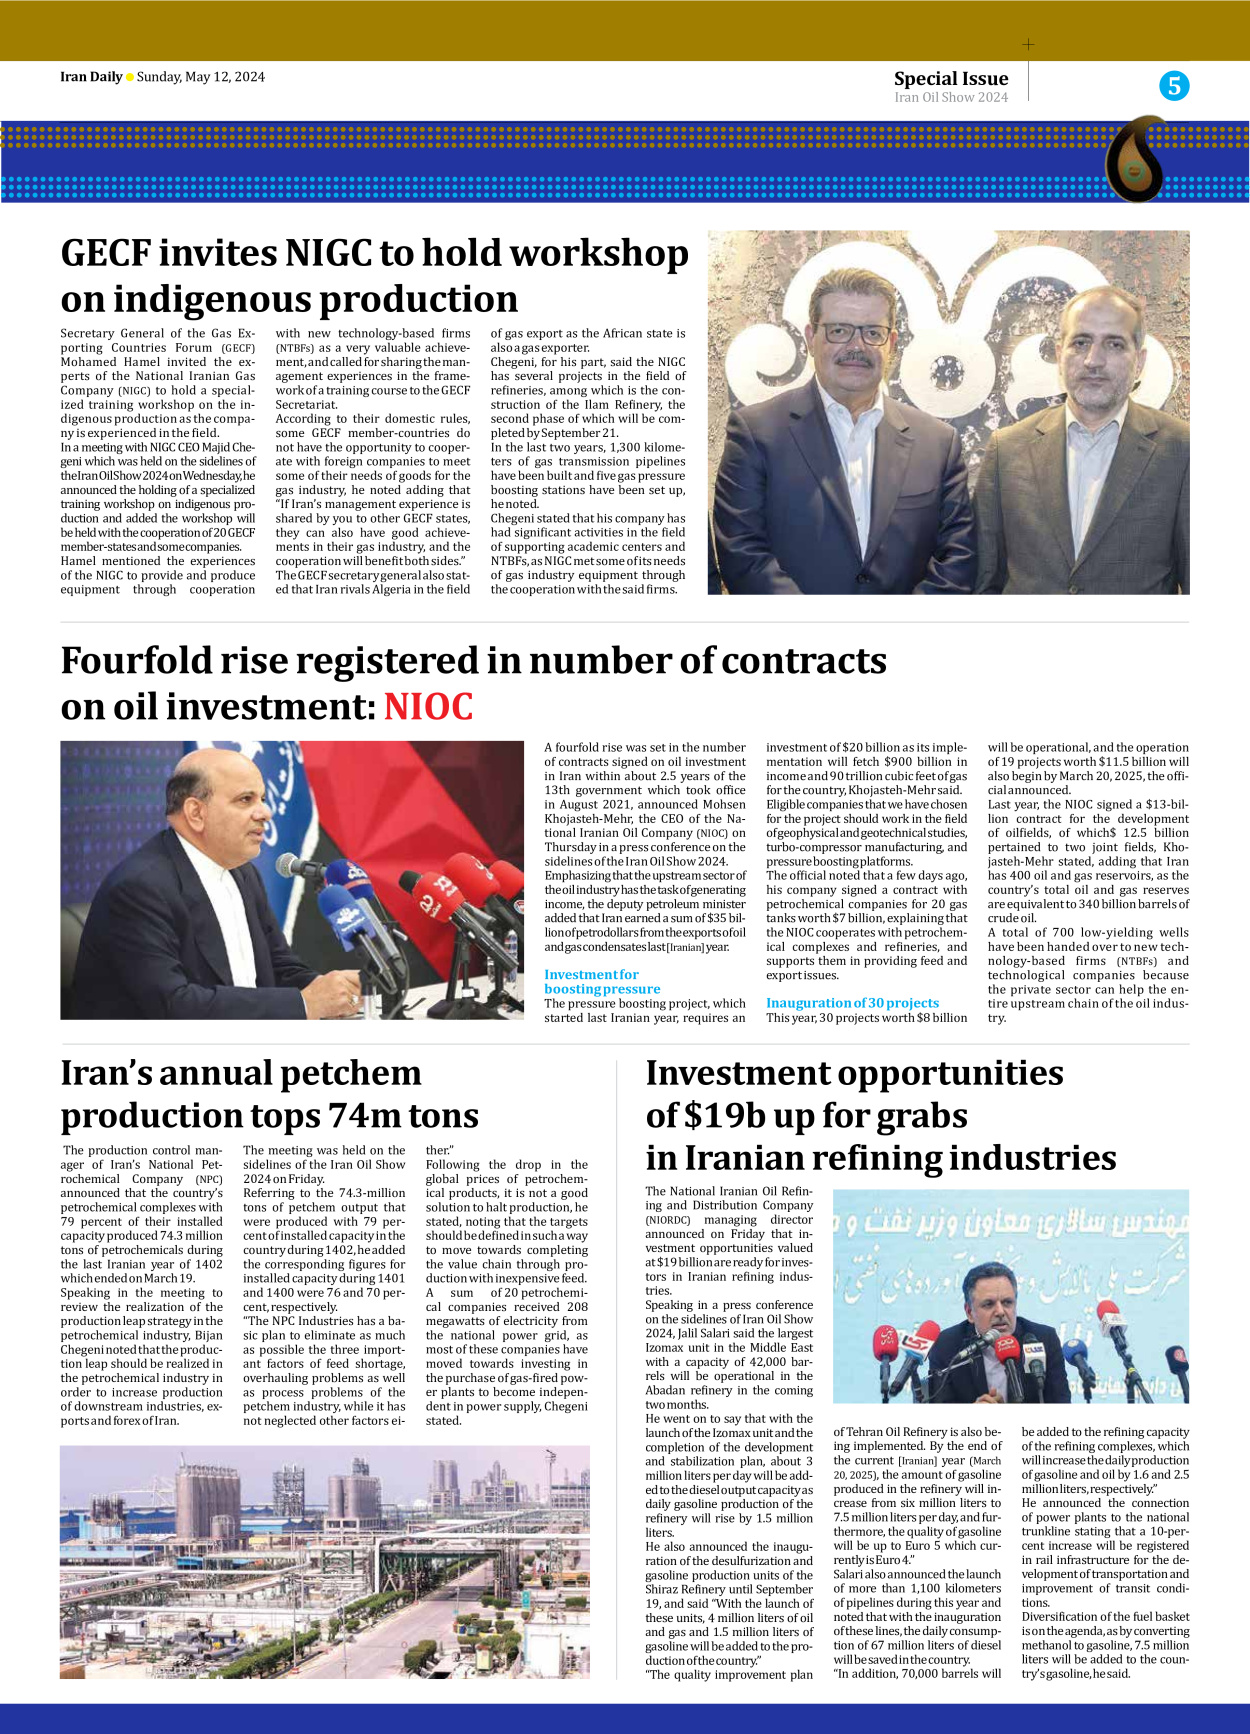 Iran Daily - Number Seven Thousand Five Hundred and Fifty Five - 12 May 2024 - Page 5